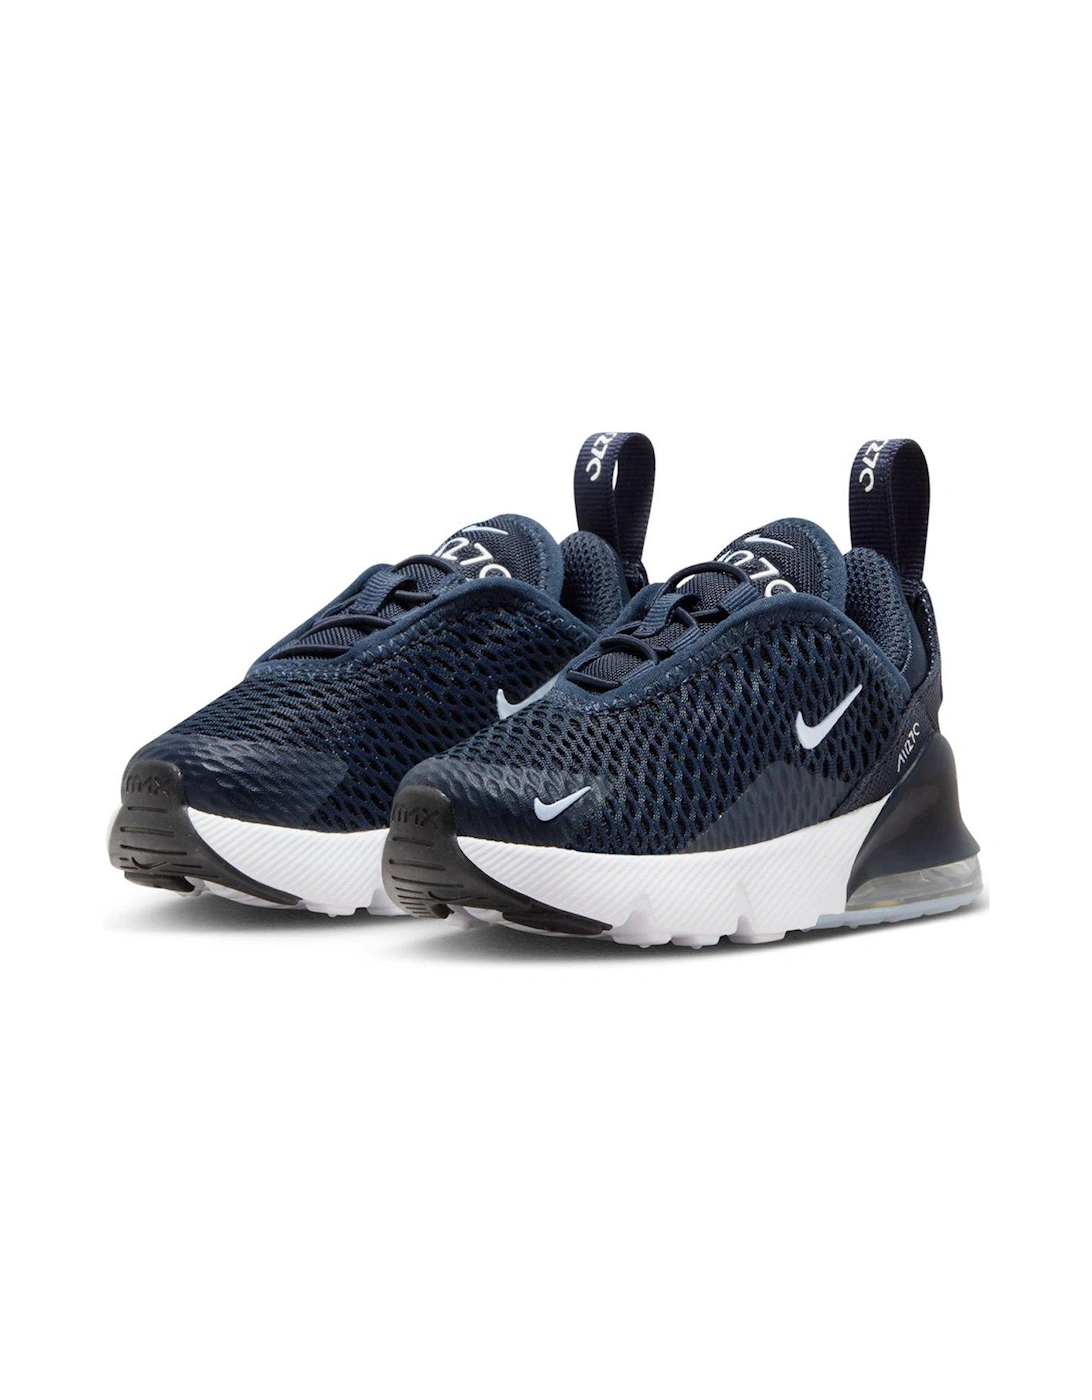 Infants Air Max 270 Trainers - Navy